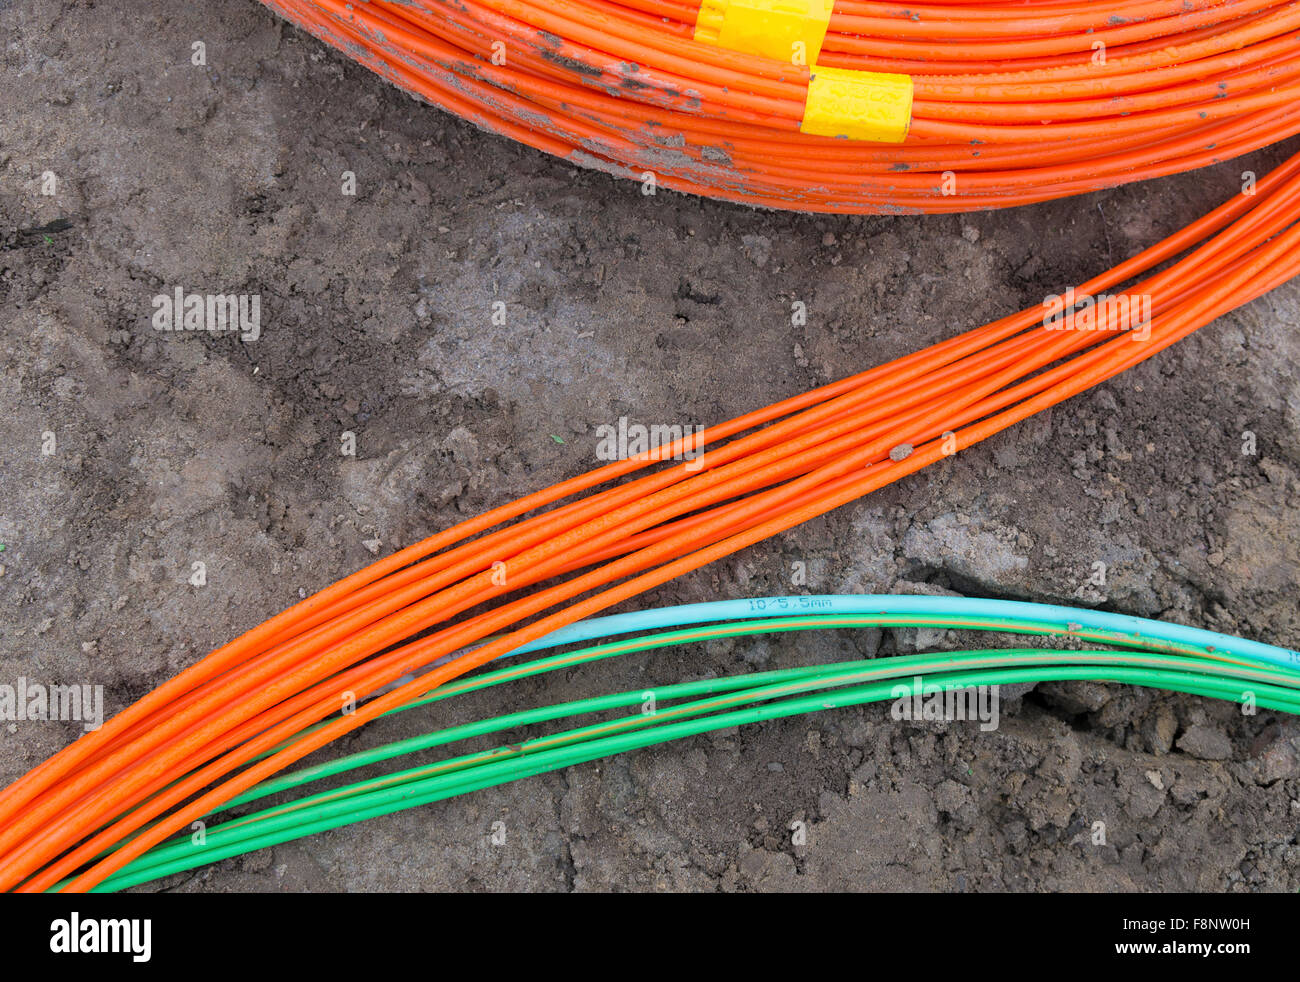 orange and green fiber optic cables on a construction site Stock Photo